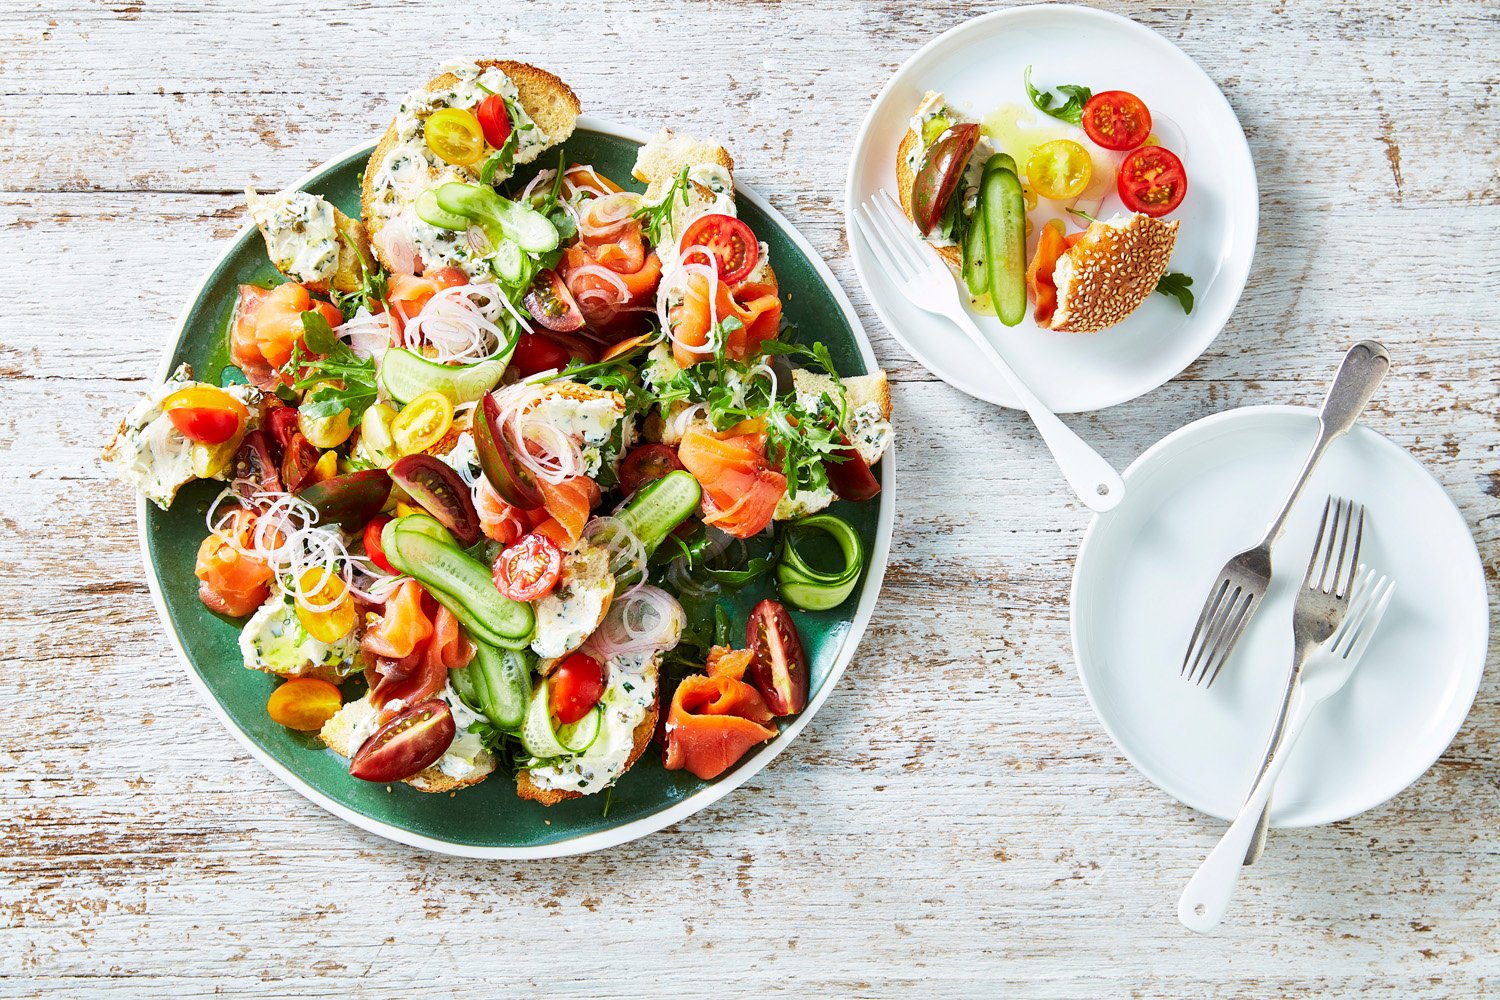 A plate with a salad of tomatoes, cucumbers, smoked salmon and bagels.